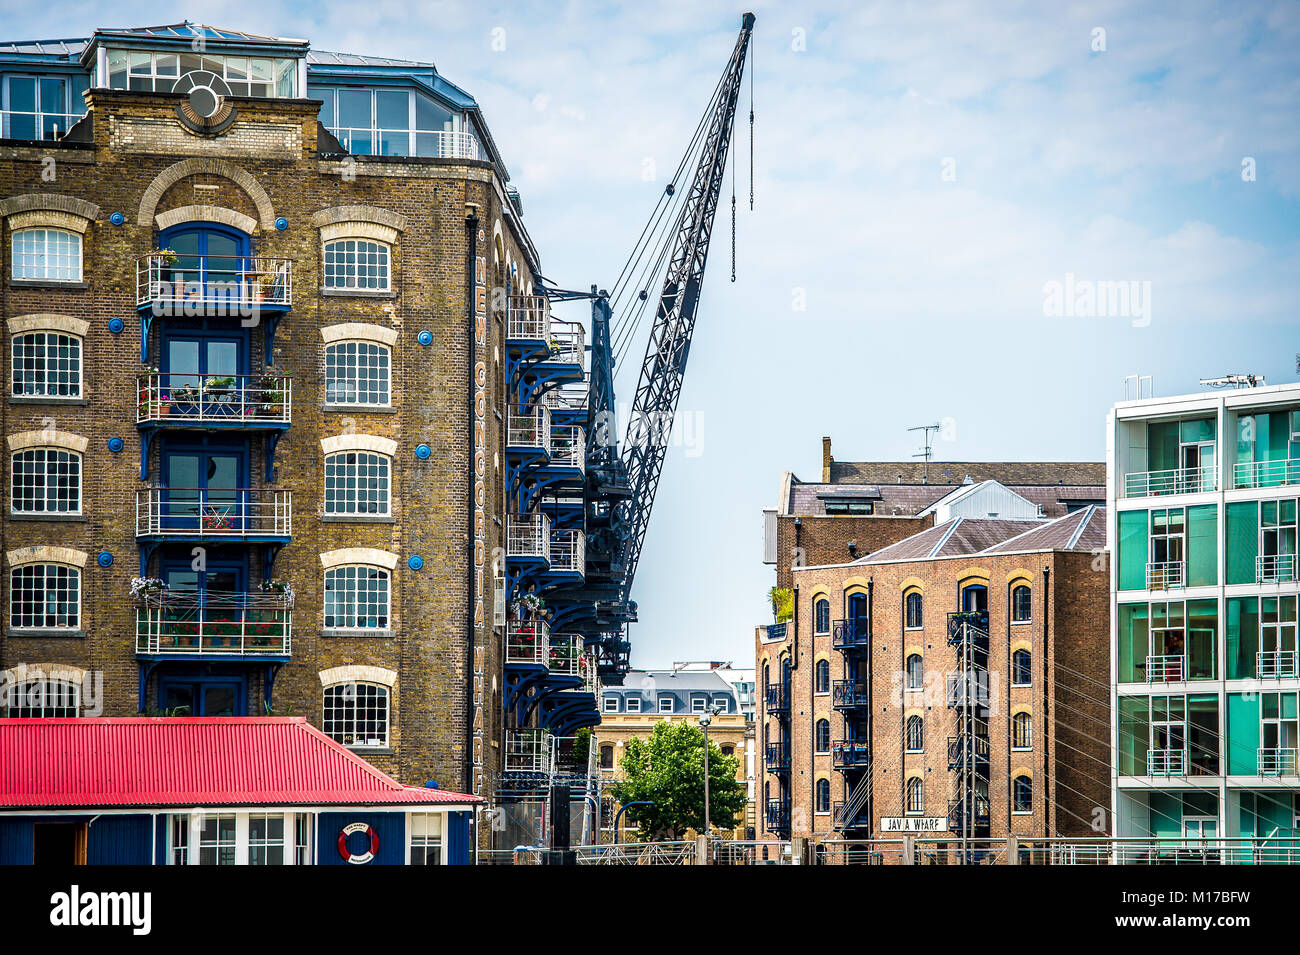 Restored & converted warehousing to residential apartments, Docklands London Stock Photo